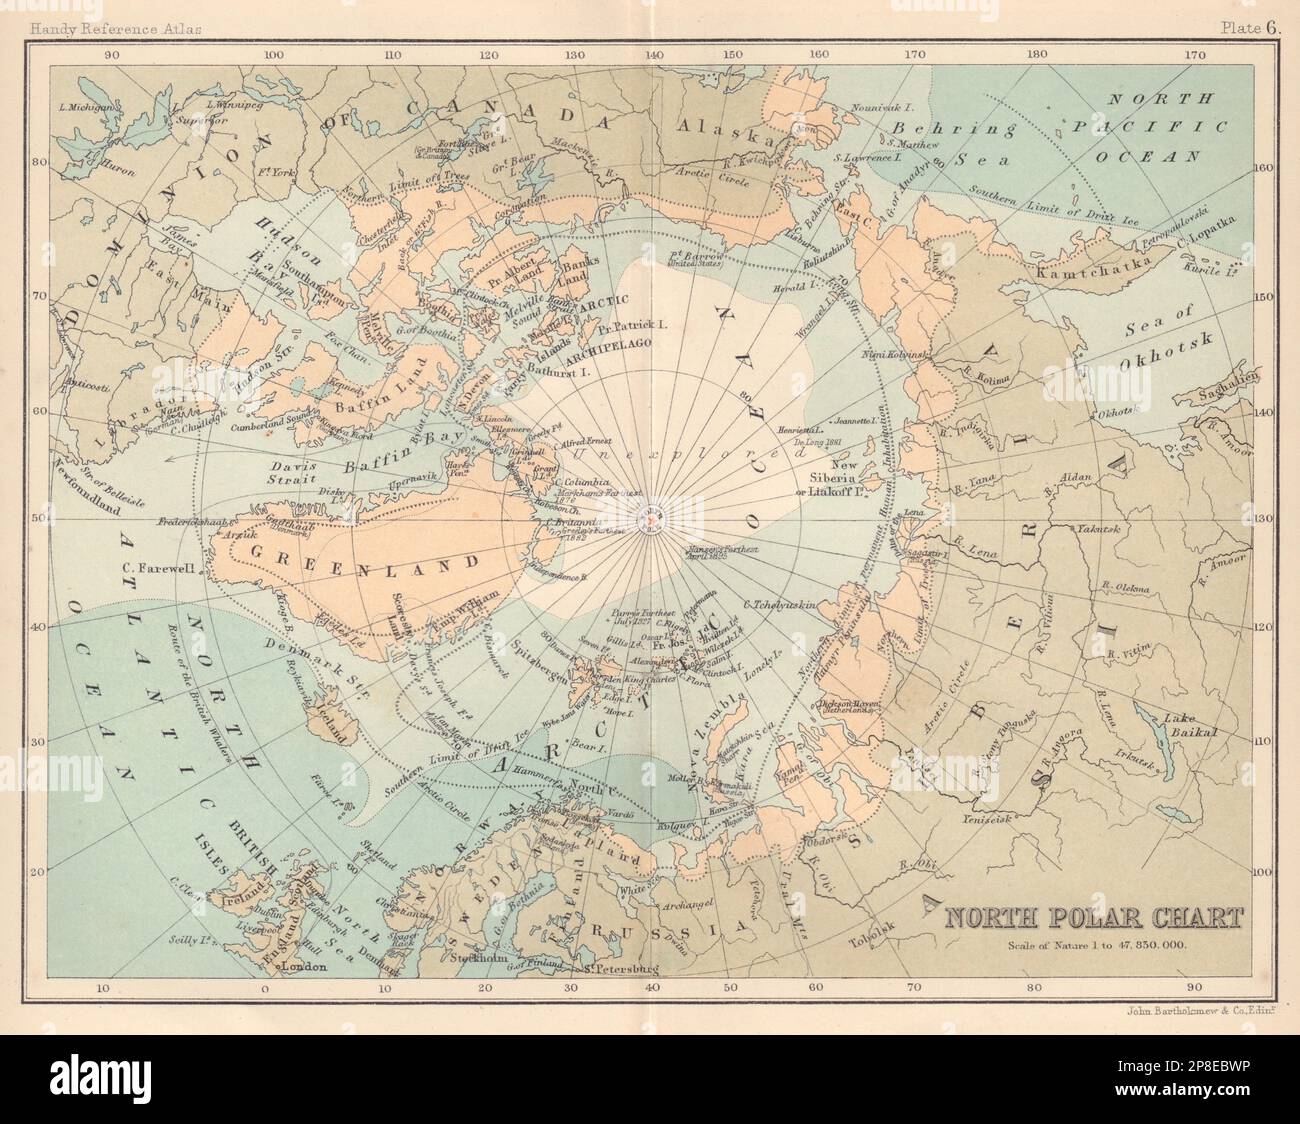 North Polar chart. Explorers' positions. Drift ice limits. Arctic 1898 old map Stock Photo